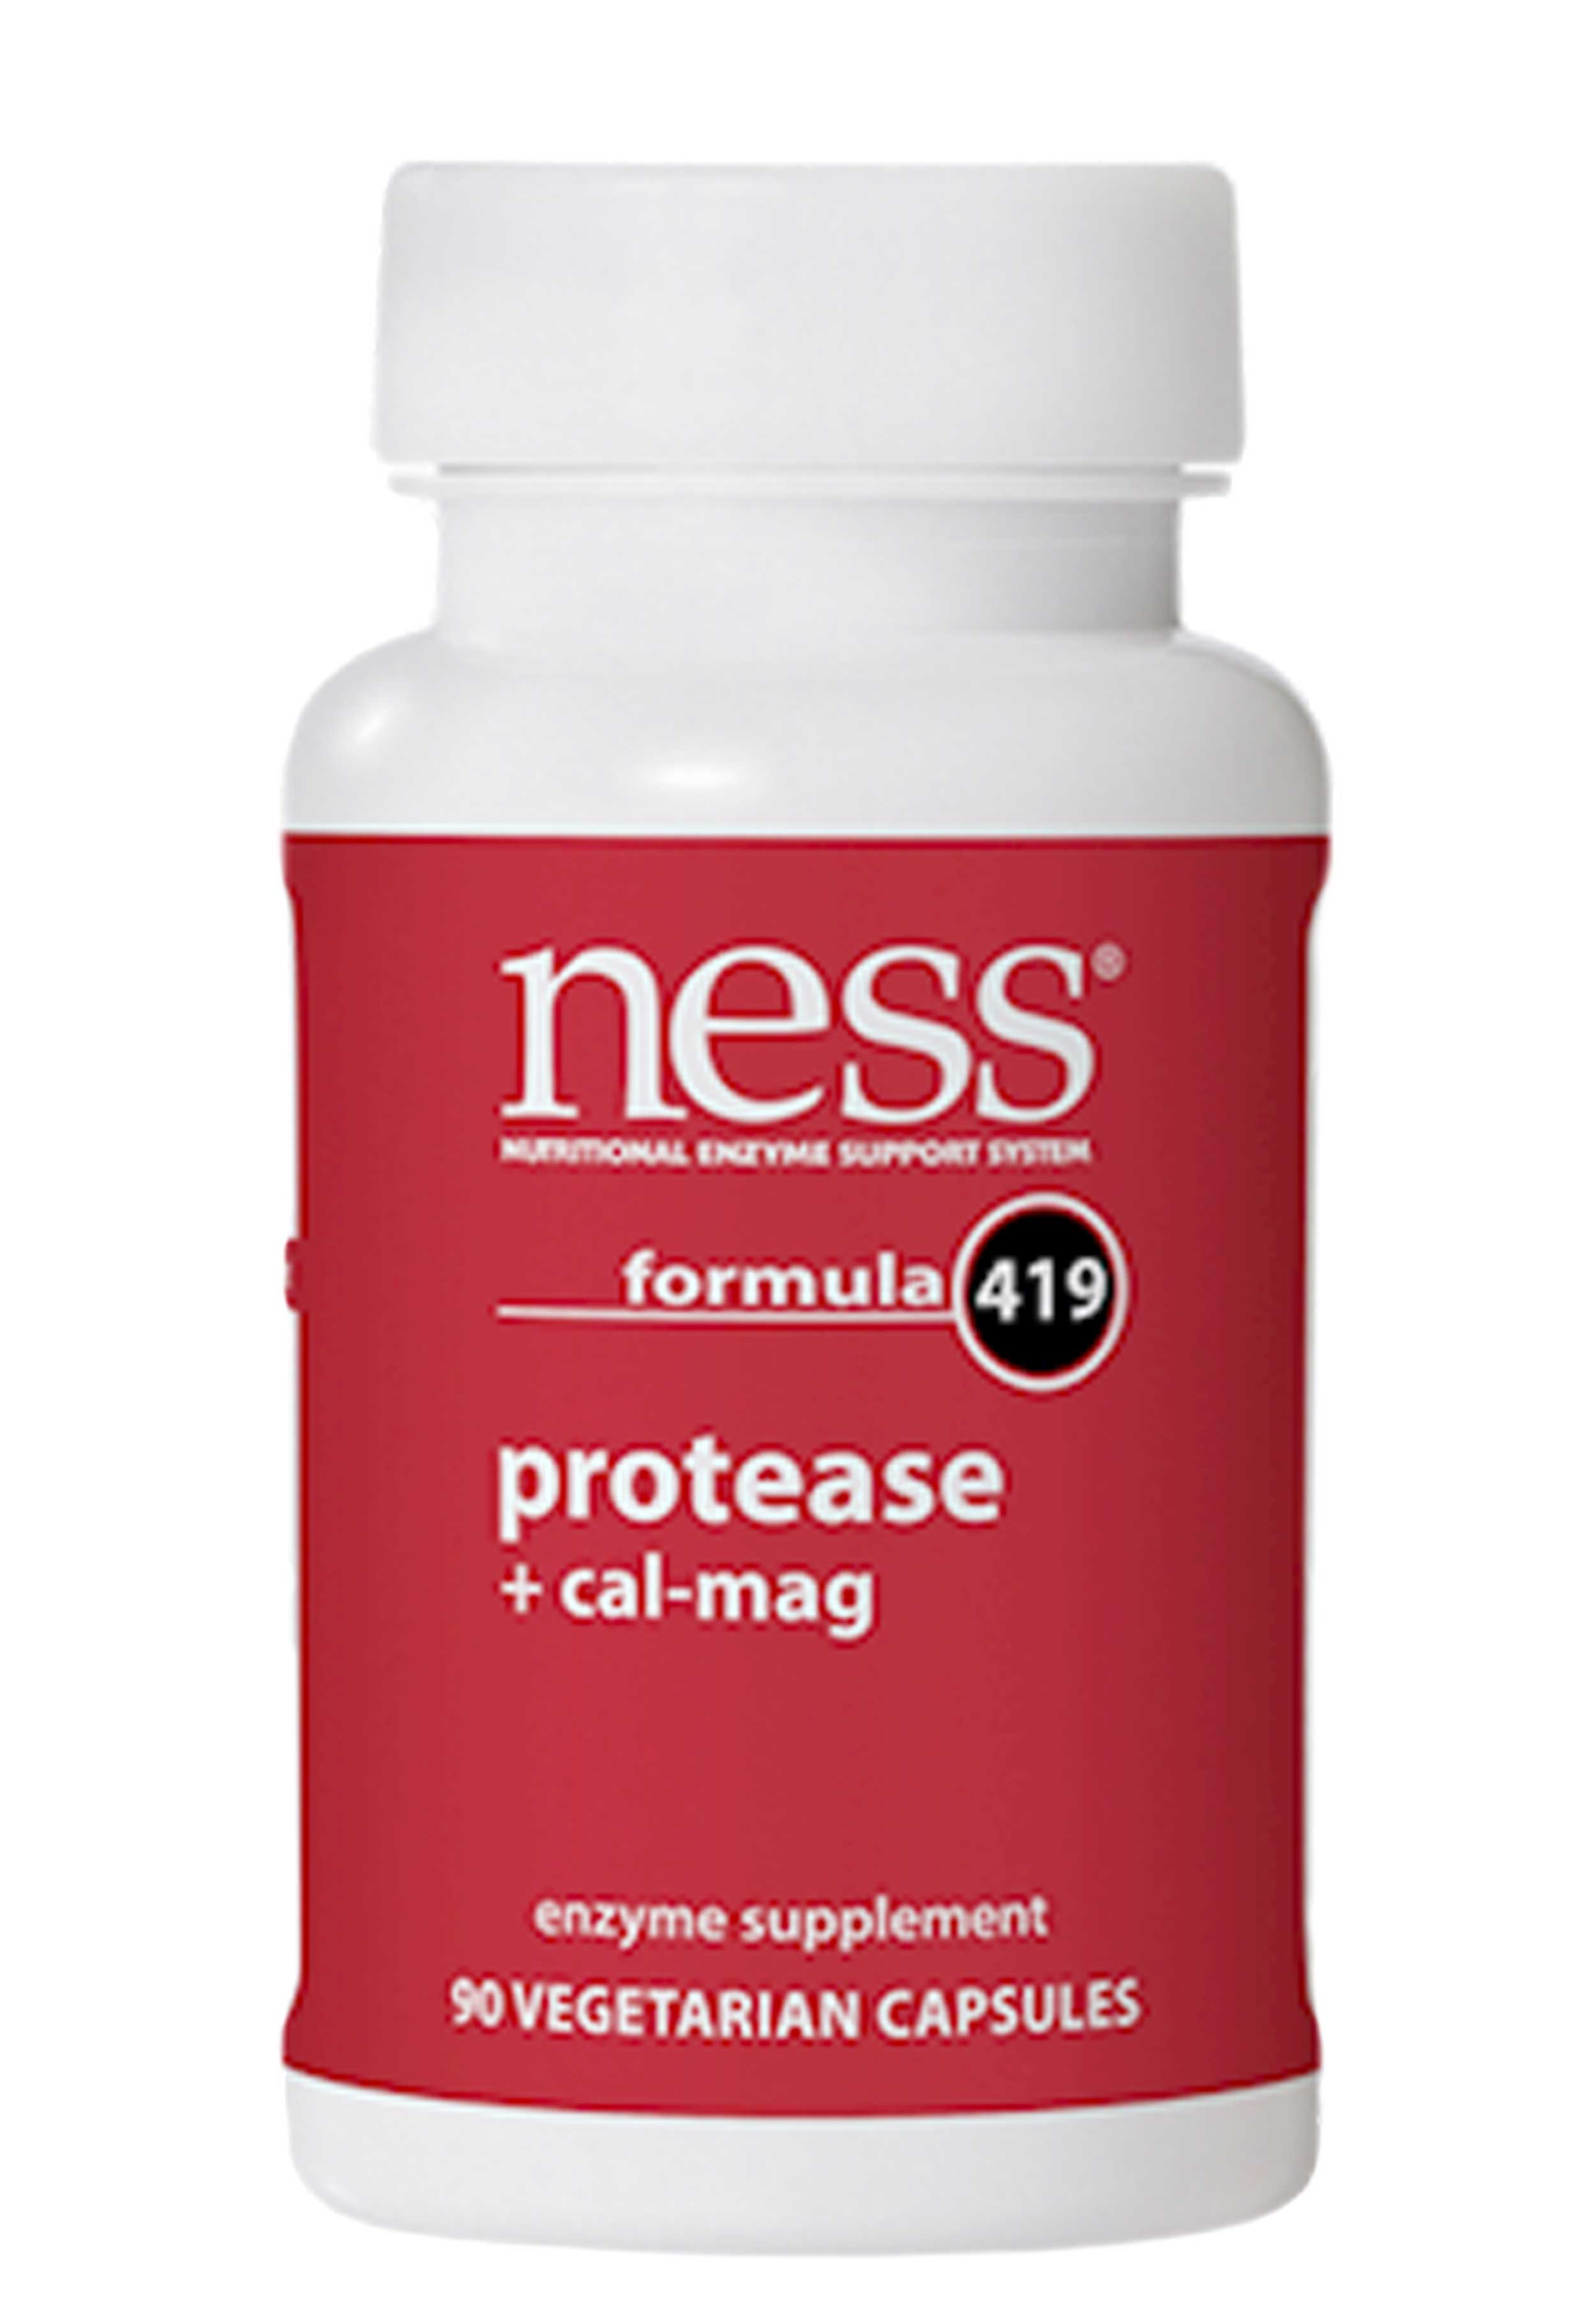 Ness Enzymes Protease + Cal-Mag formula 419